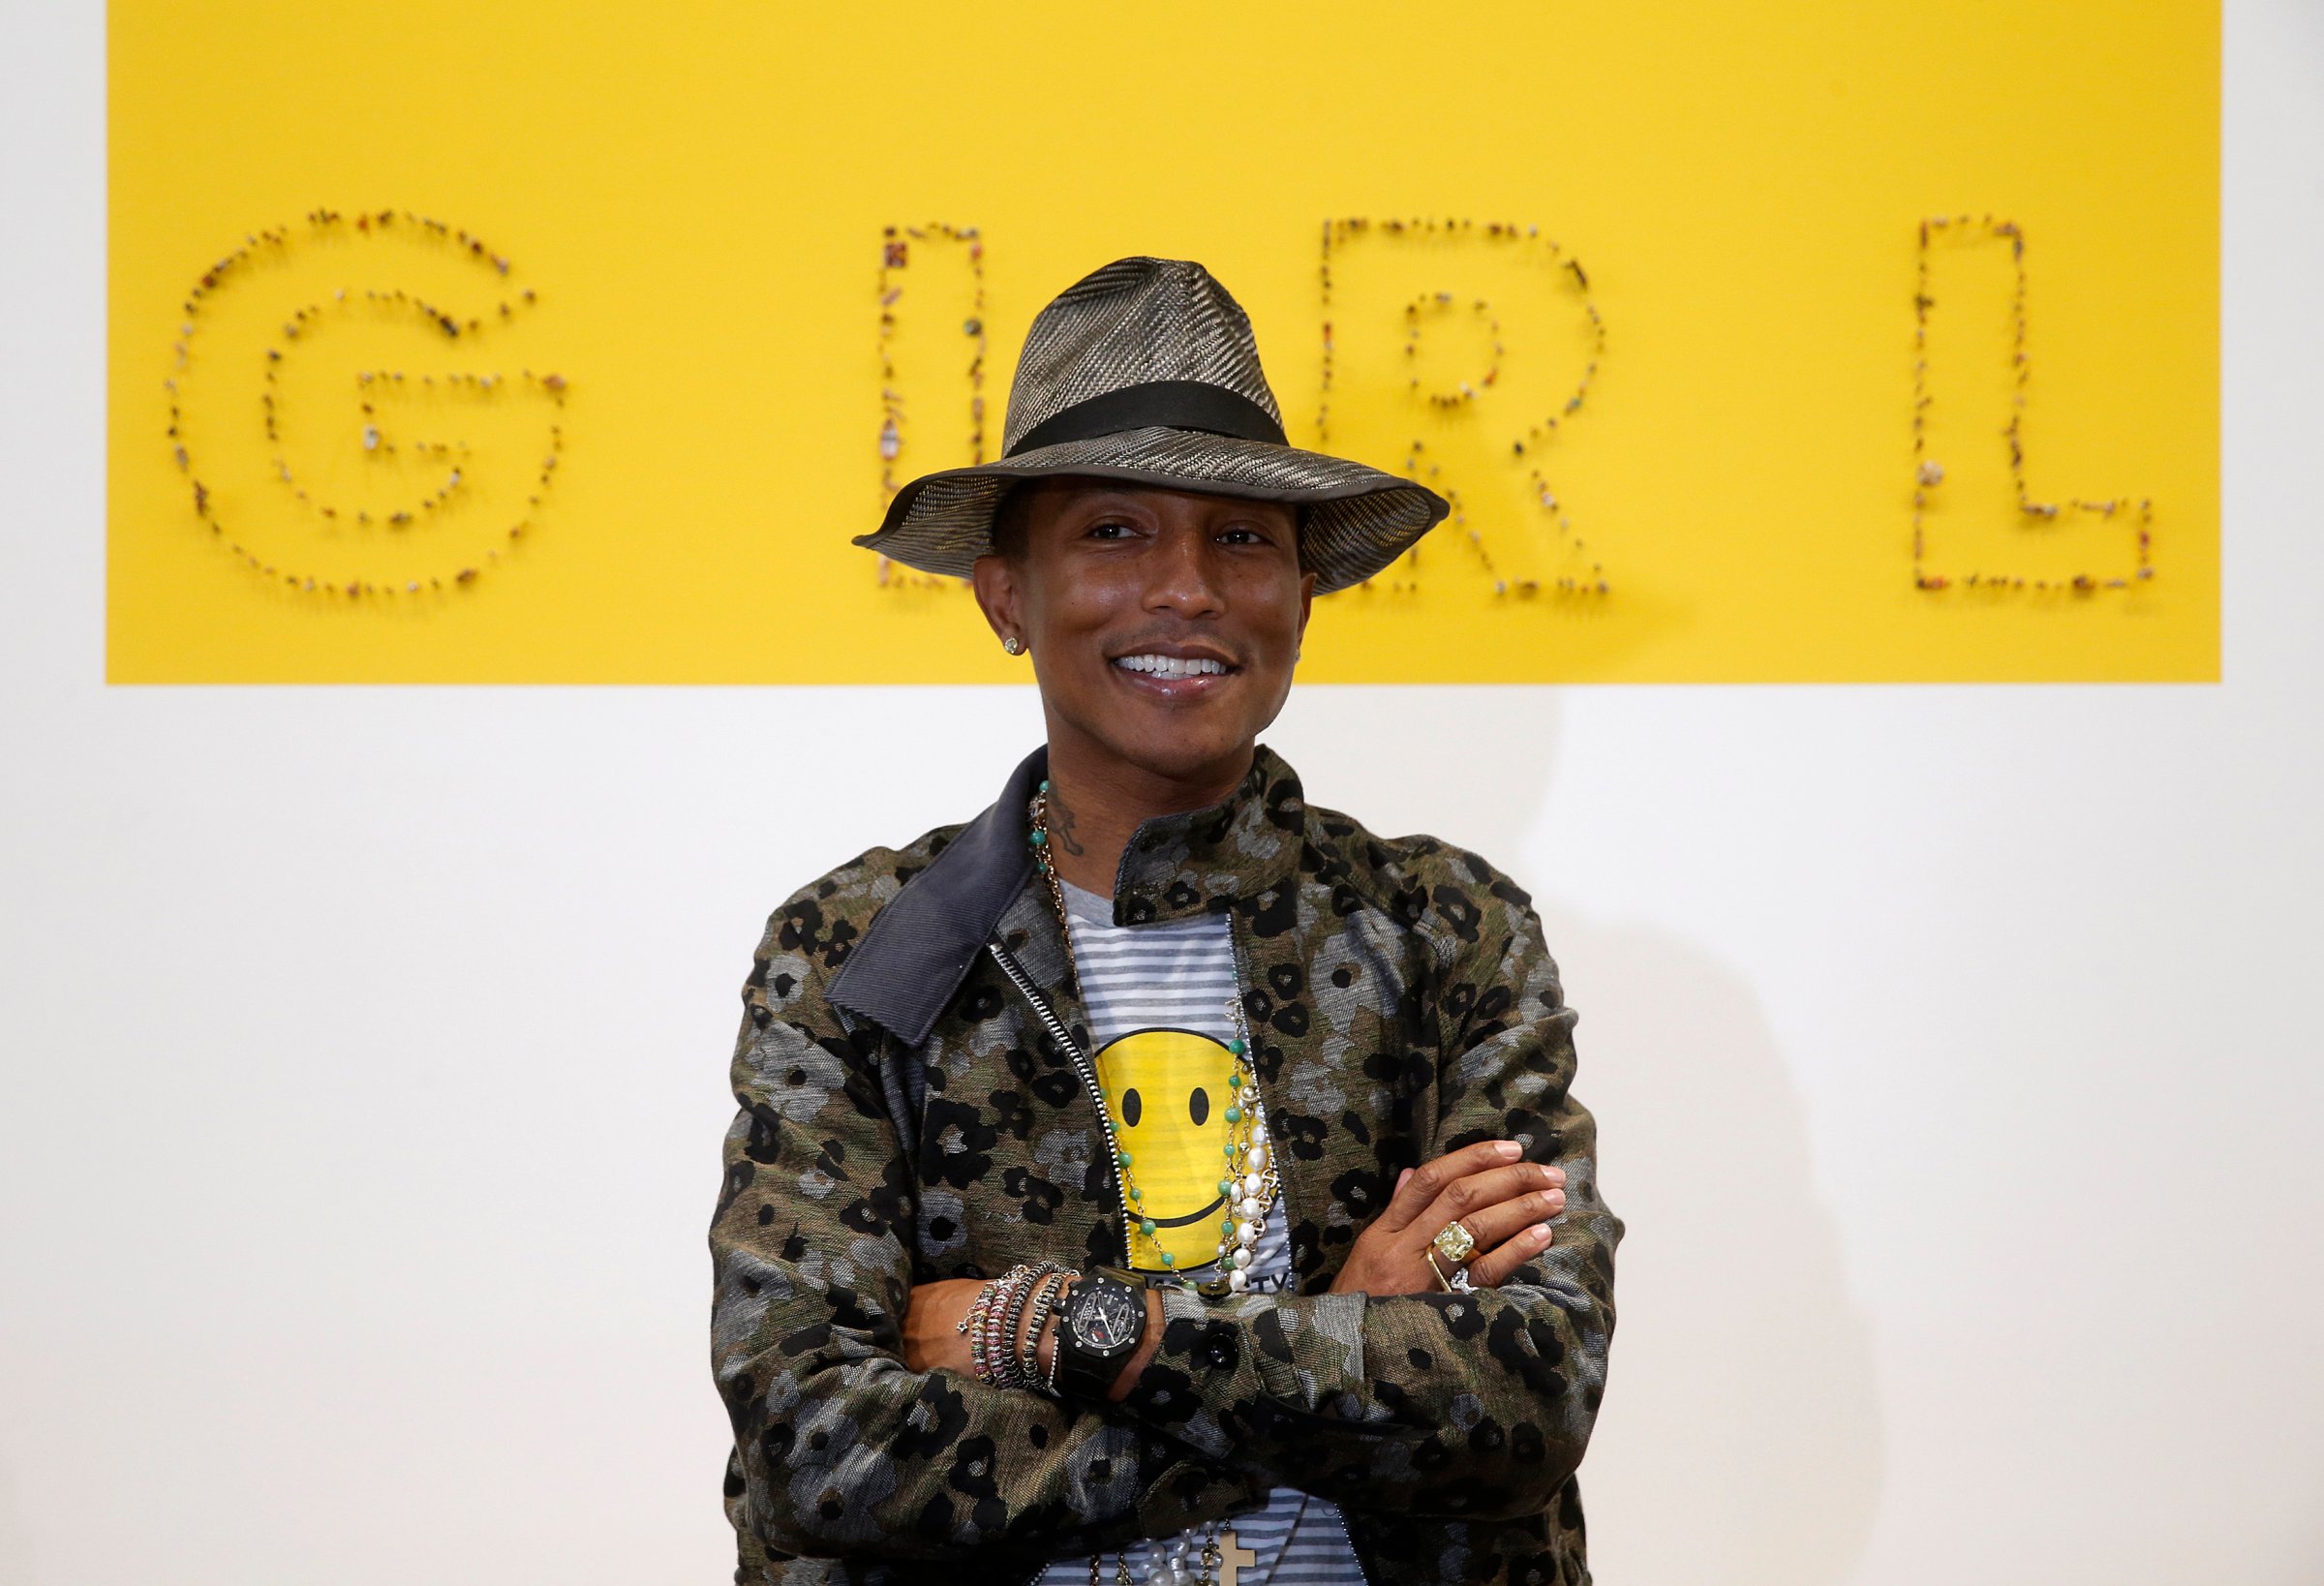 Singer Pharrell Williams poses during the opening of the exhibition "GIRL" at the Galerie Perrotin in Paris